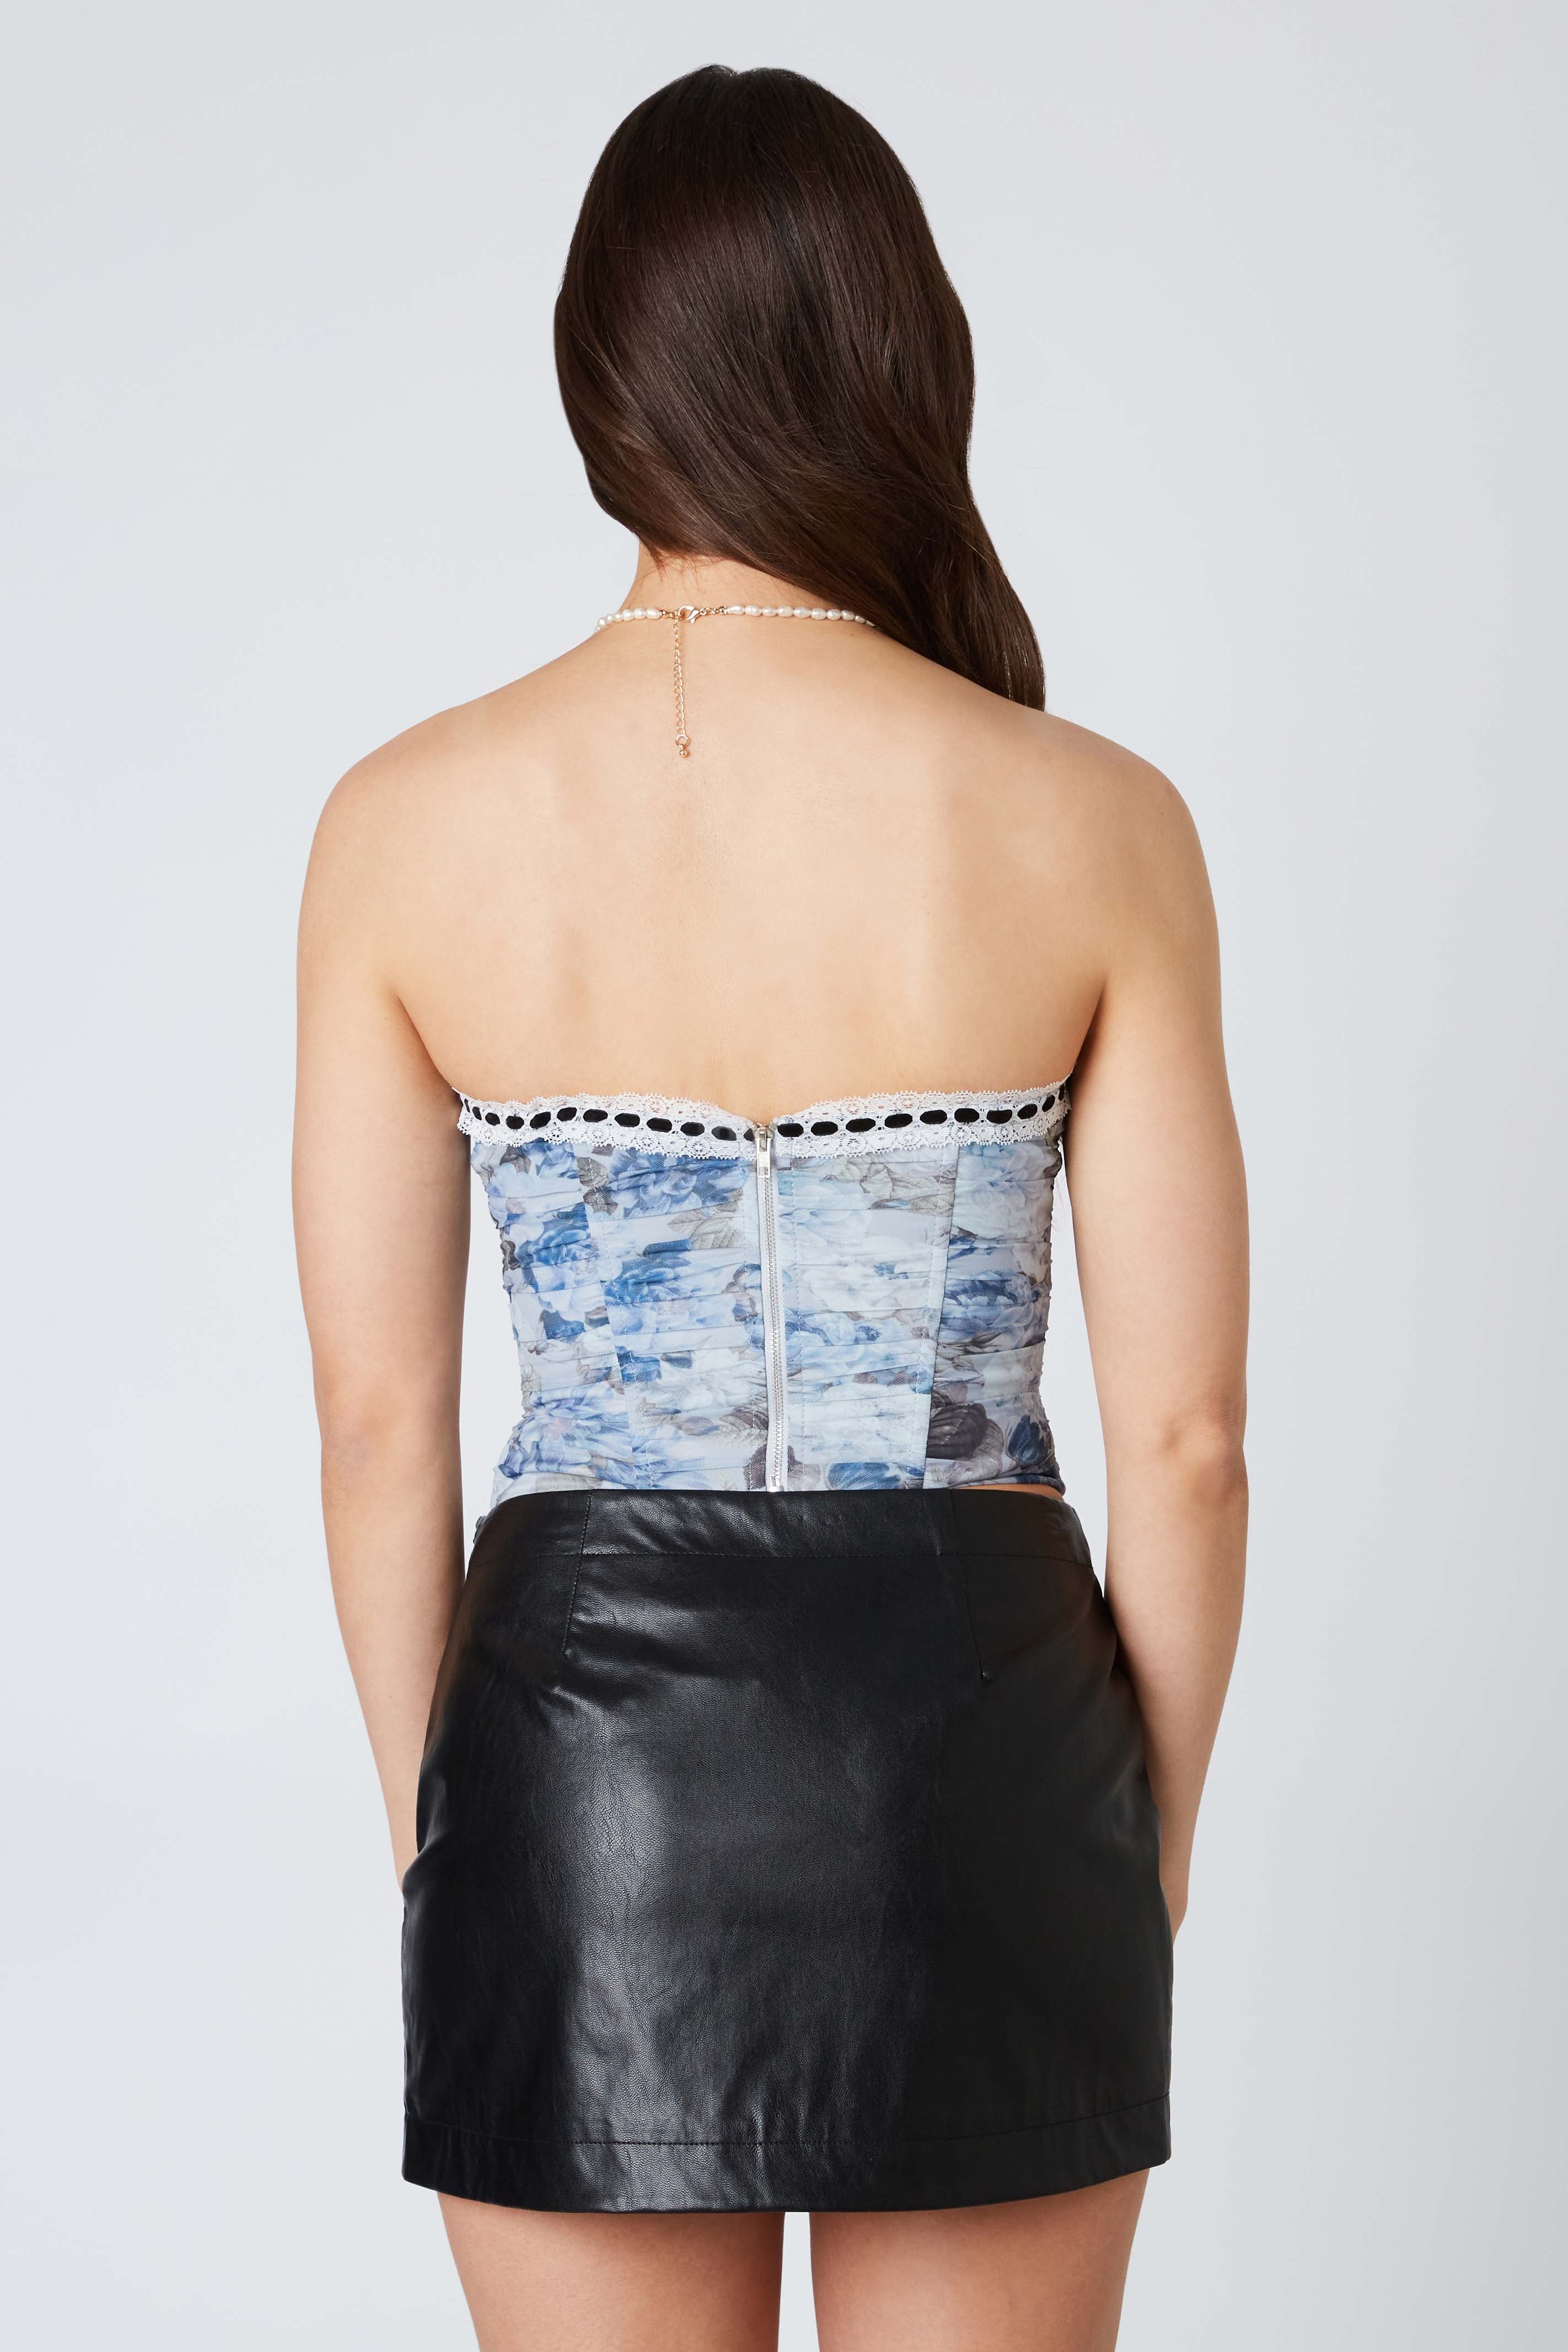 Floral Mesh Corset in Blue Back View